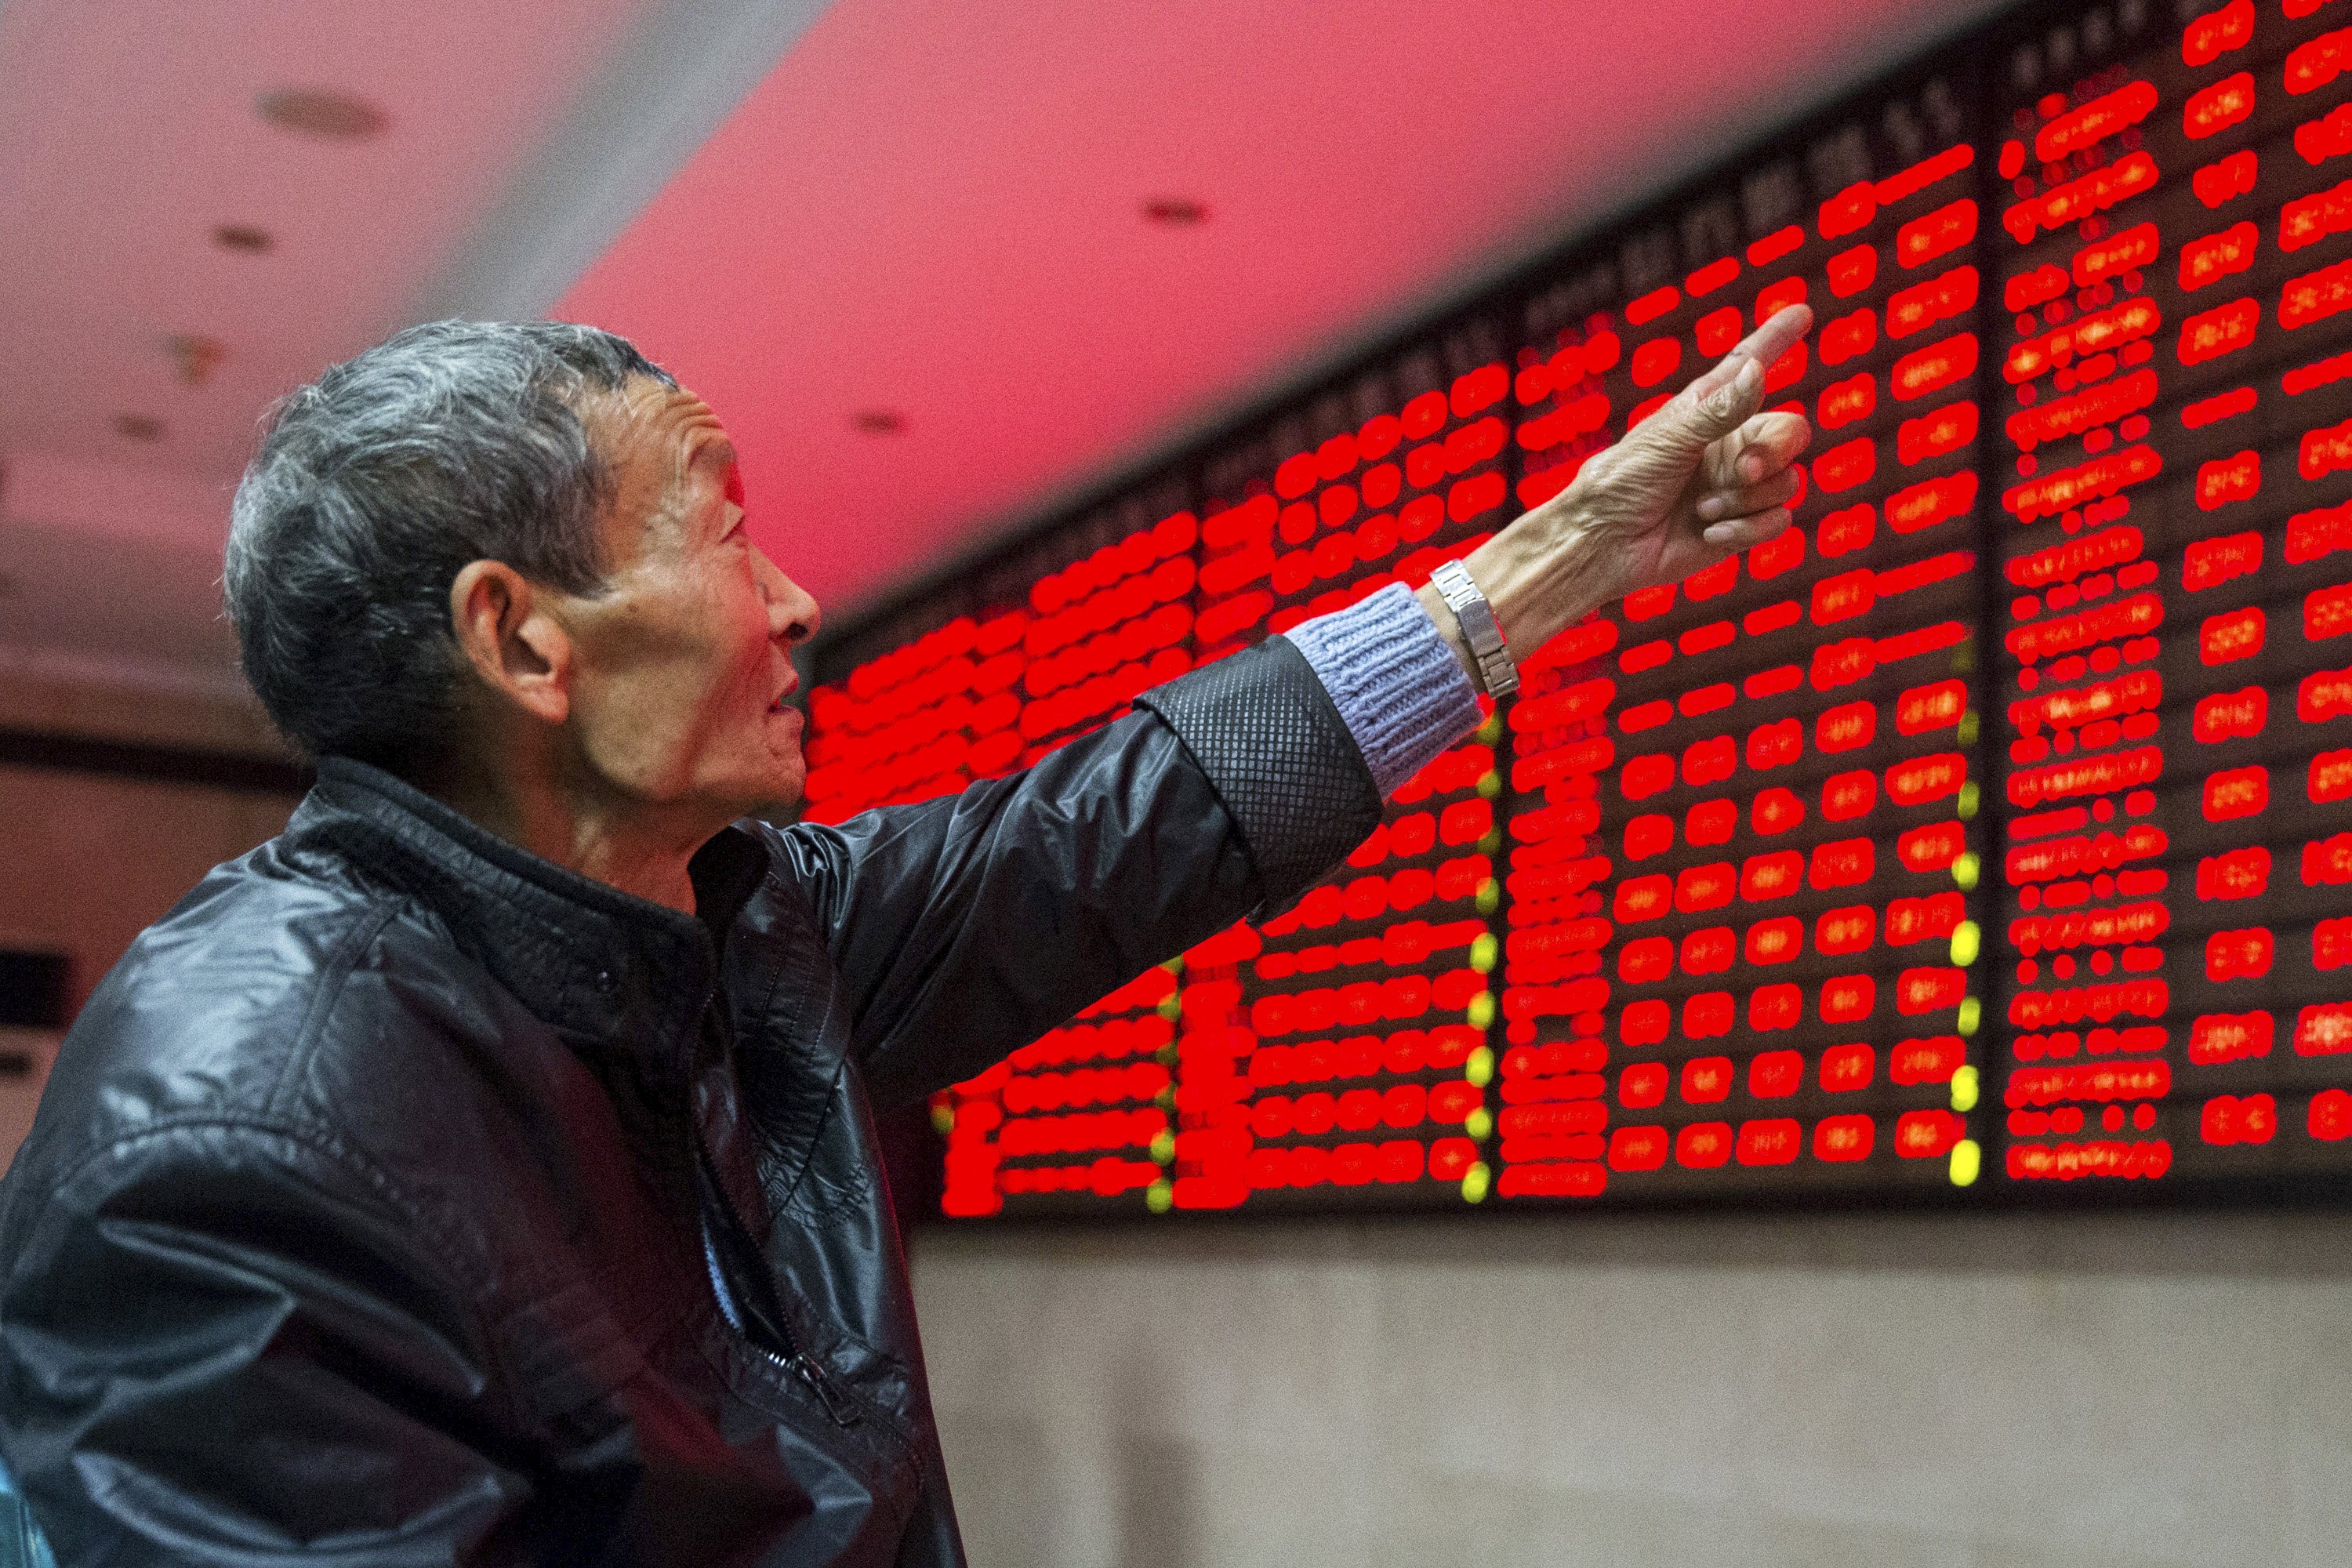 An investor points to an electronic board showing stock information as he speaks to another investor, at a brokerage house in Nanjing, Jiangsu province, China, November 19, 2015. China stocks ended higher on Thursday, with a sharp rebound in small-caps offsetting the drag from property shares and investor caution ahead of a flurry of new listings. REUTERS/China Daily CHINA OUT. NO COMMERCIAL OR EDITORIAL SALES IN CHINA